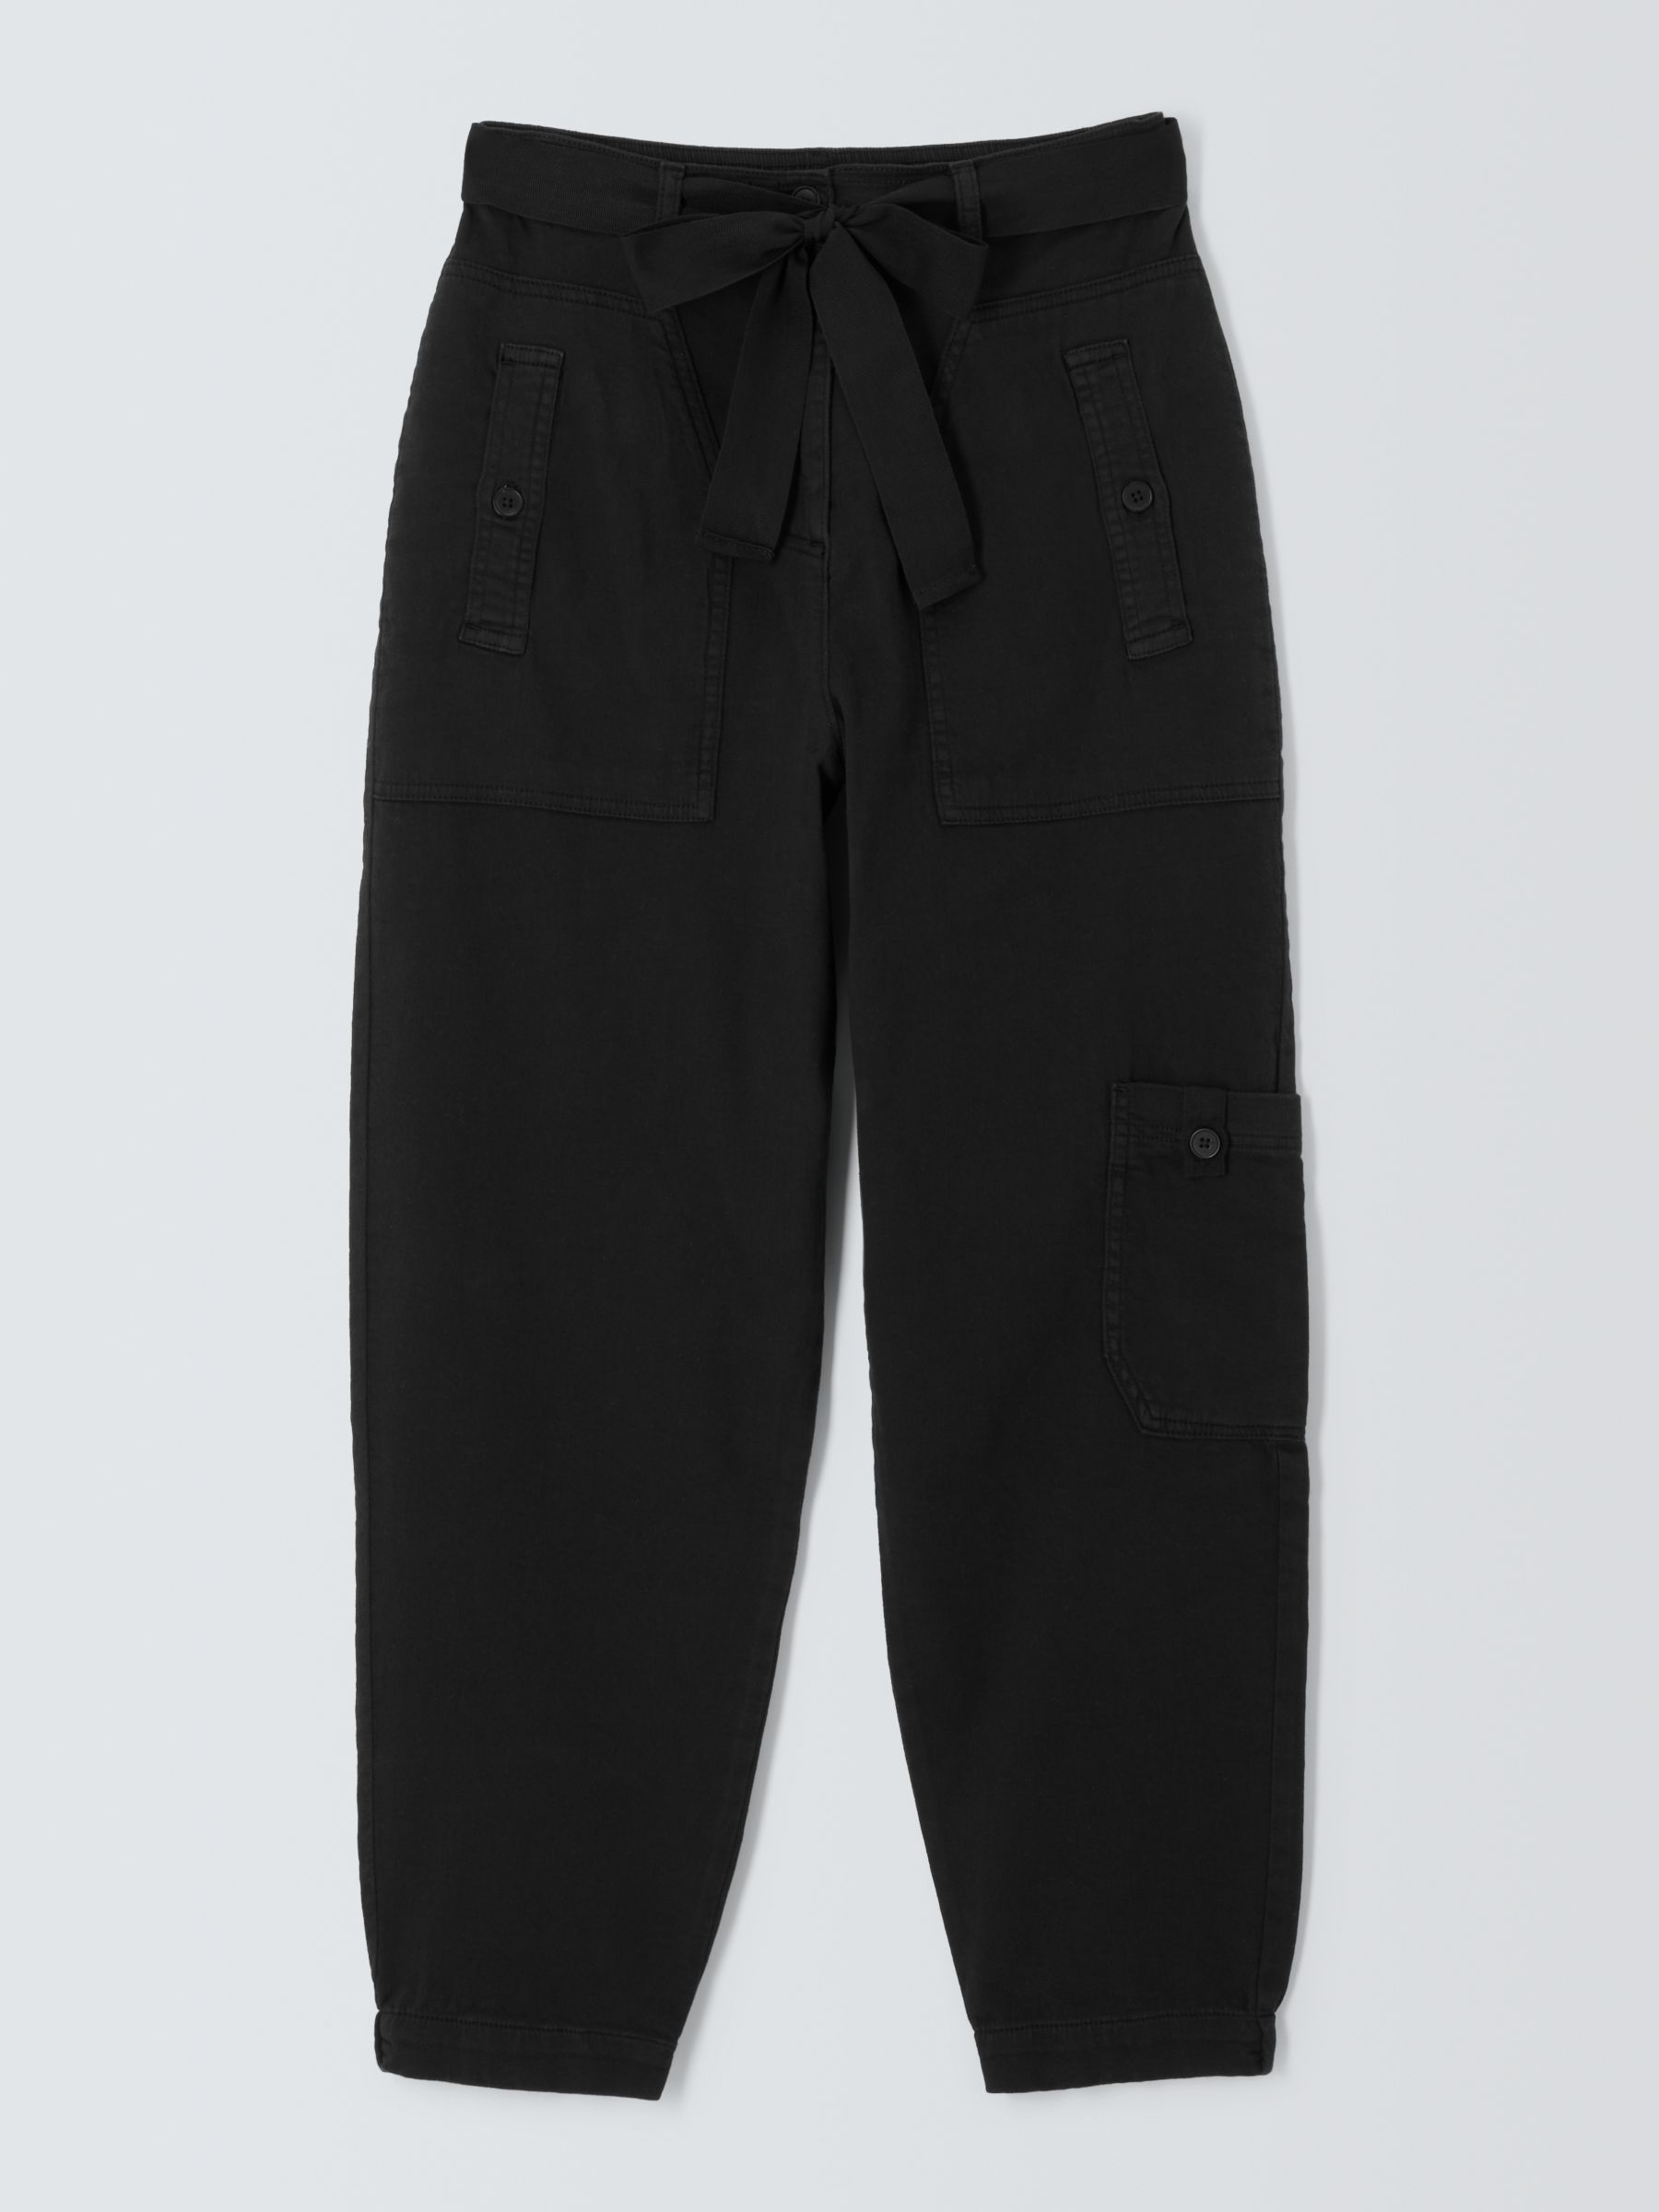 AND/OR Caitlin Cargo Trousers, Black, 6